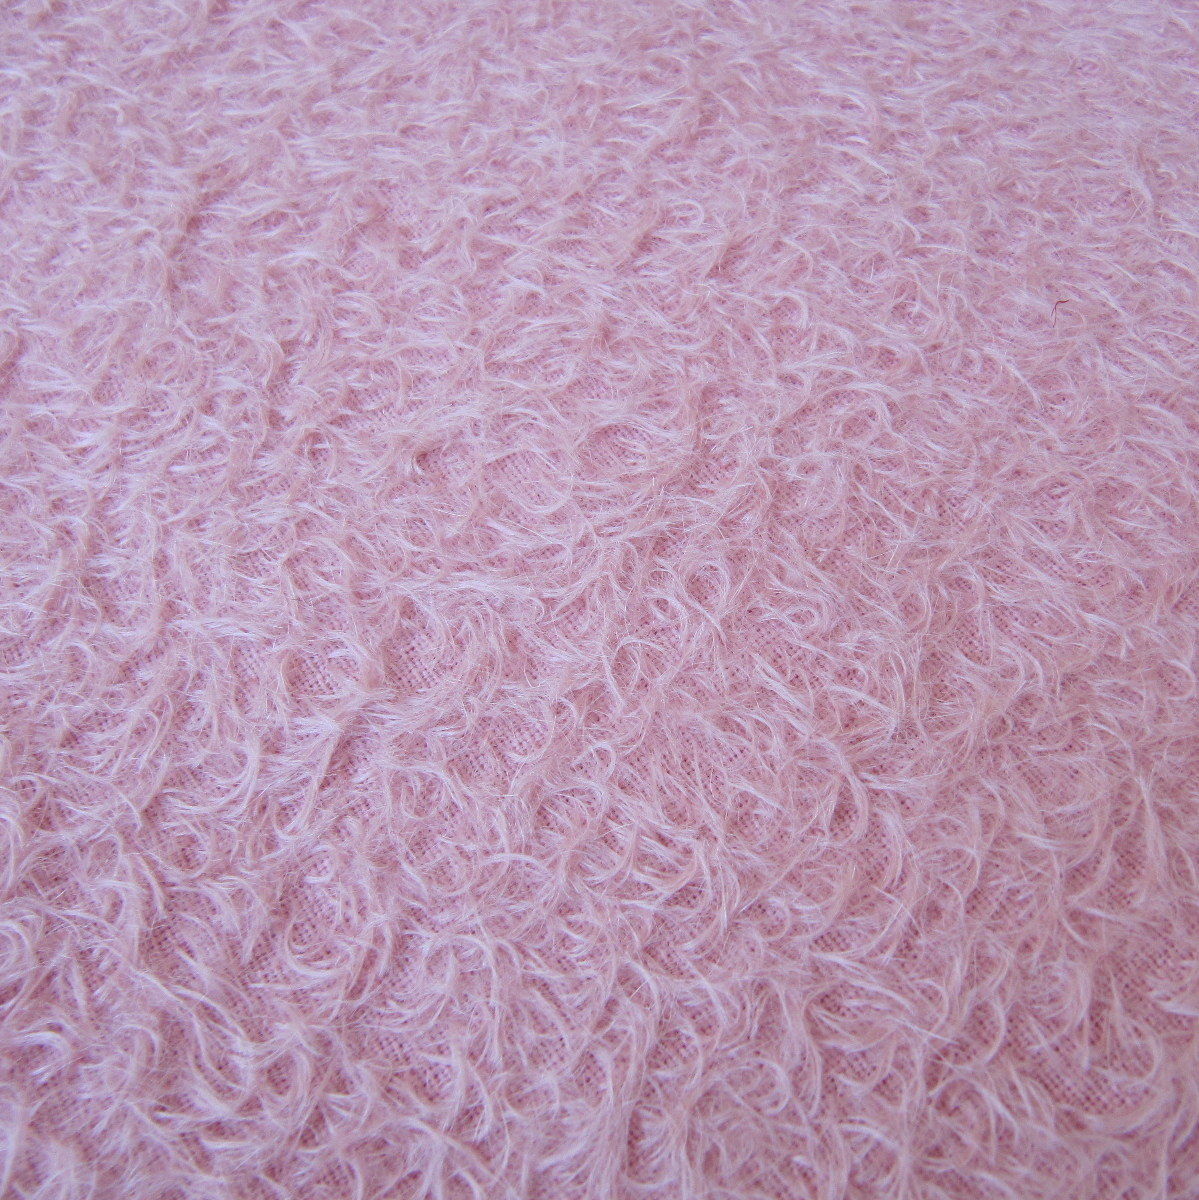 ' SUZY ' MOHAIR - Soft baby pink, matted / antique pile - Furaddiction